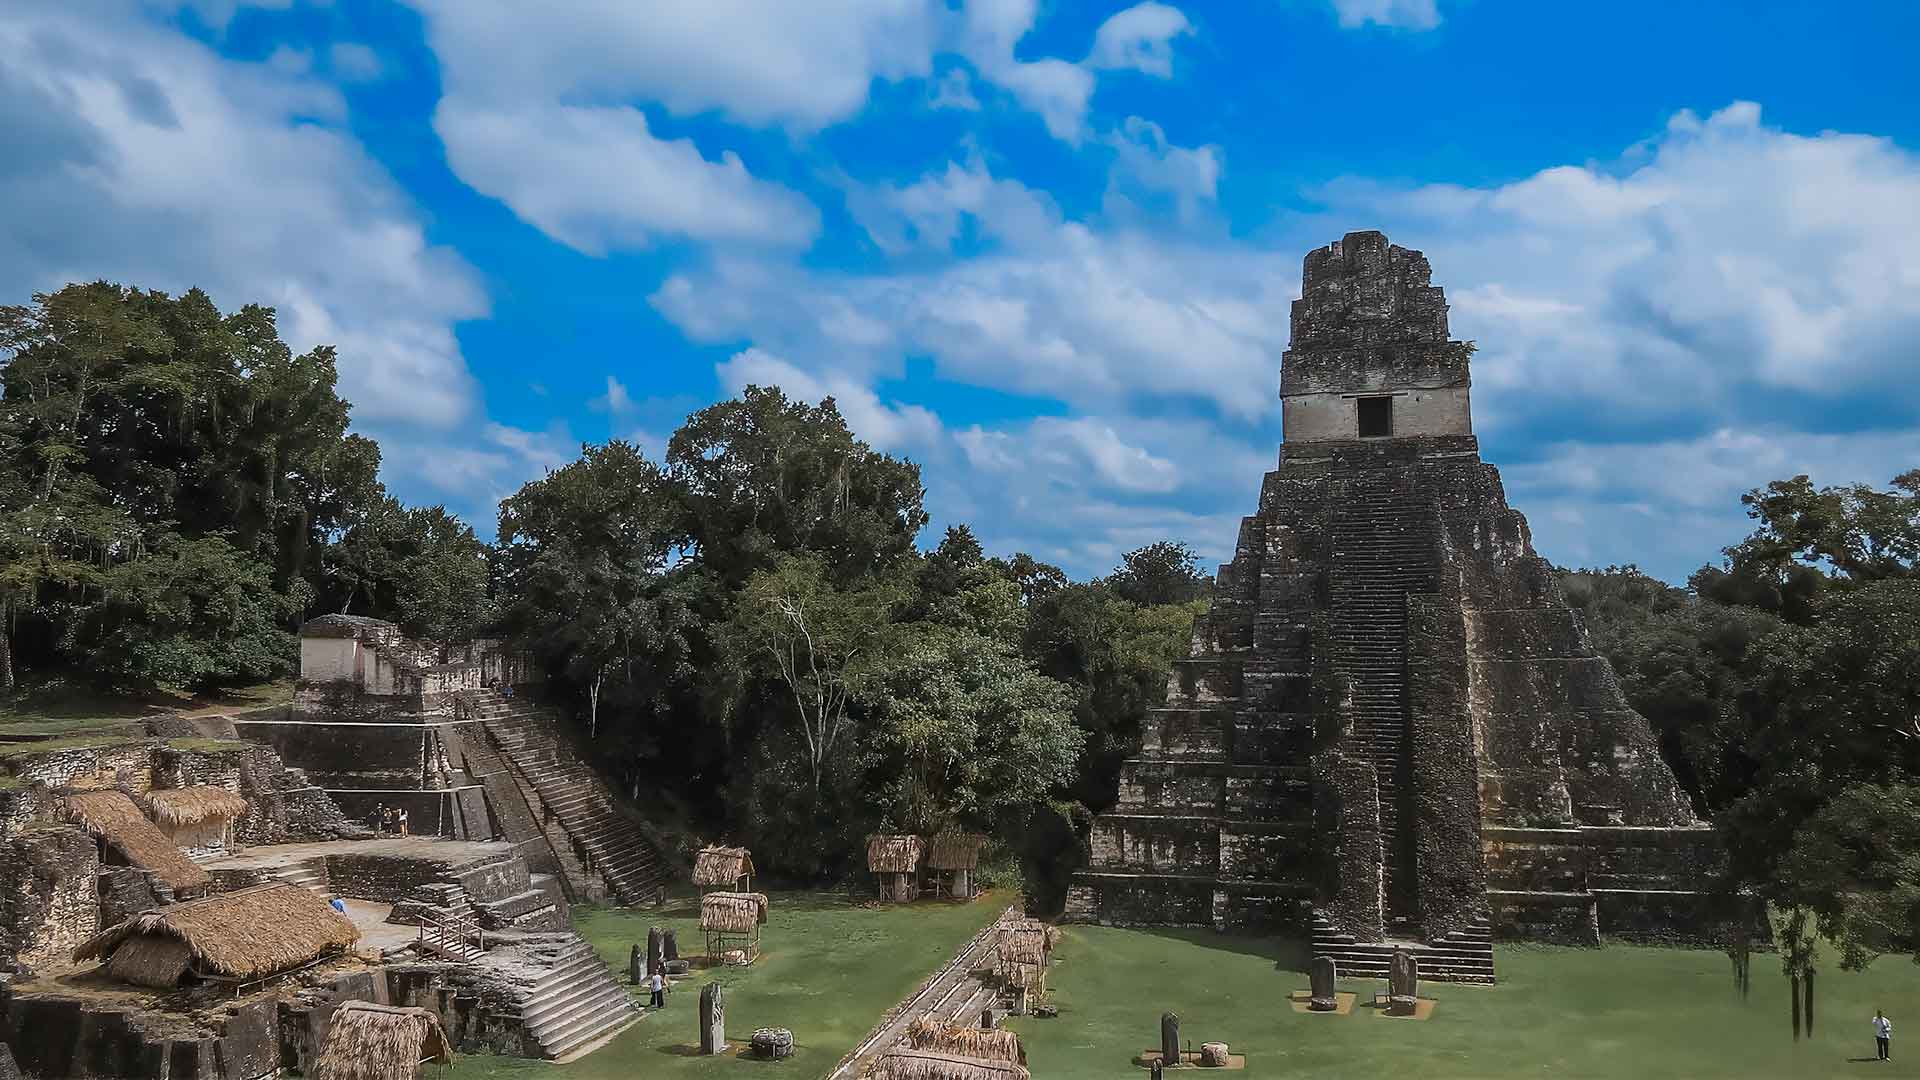 Is it safe to travel to Guatemala? View of Tikal's main plaza featuring the iconic Great Jaguar Temple, a popular and safe tourist destination.